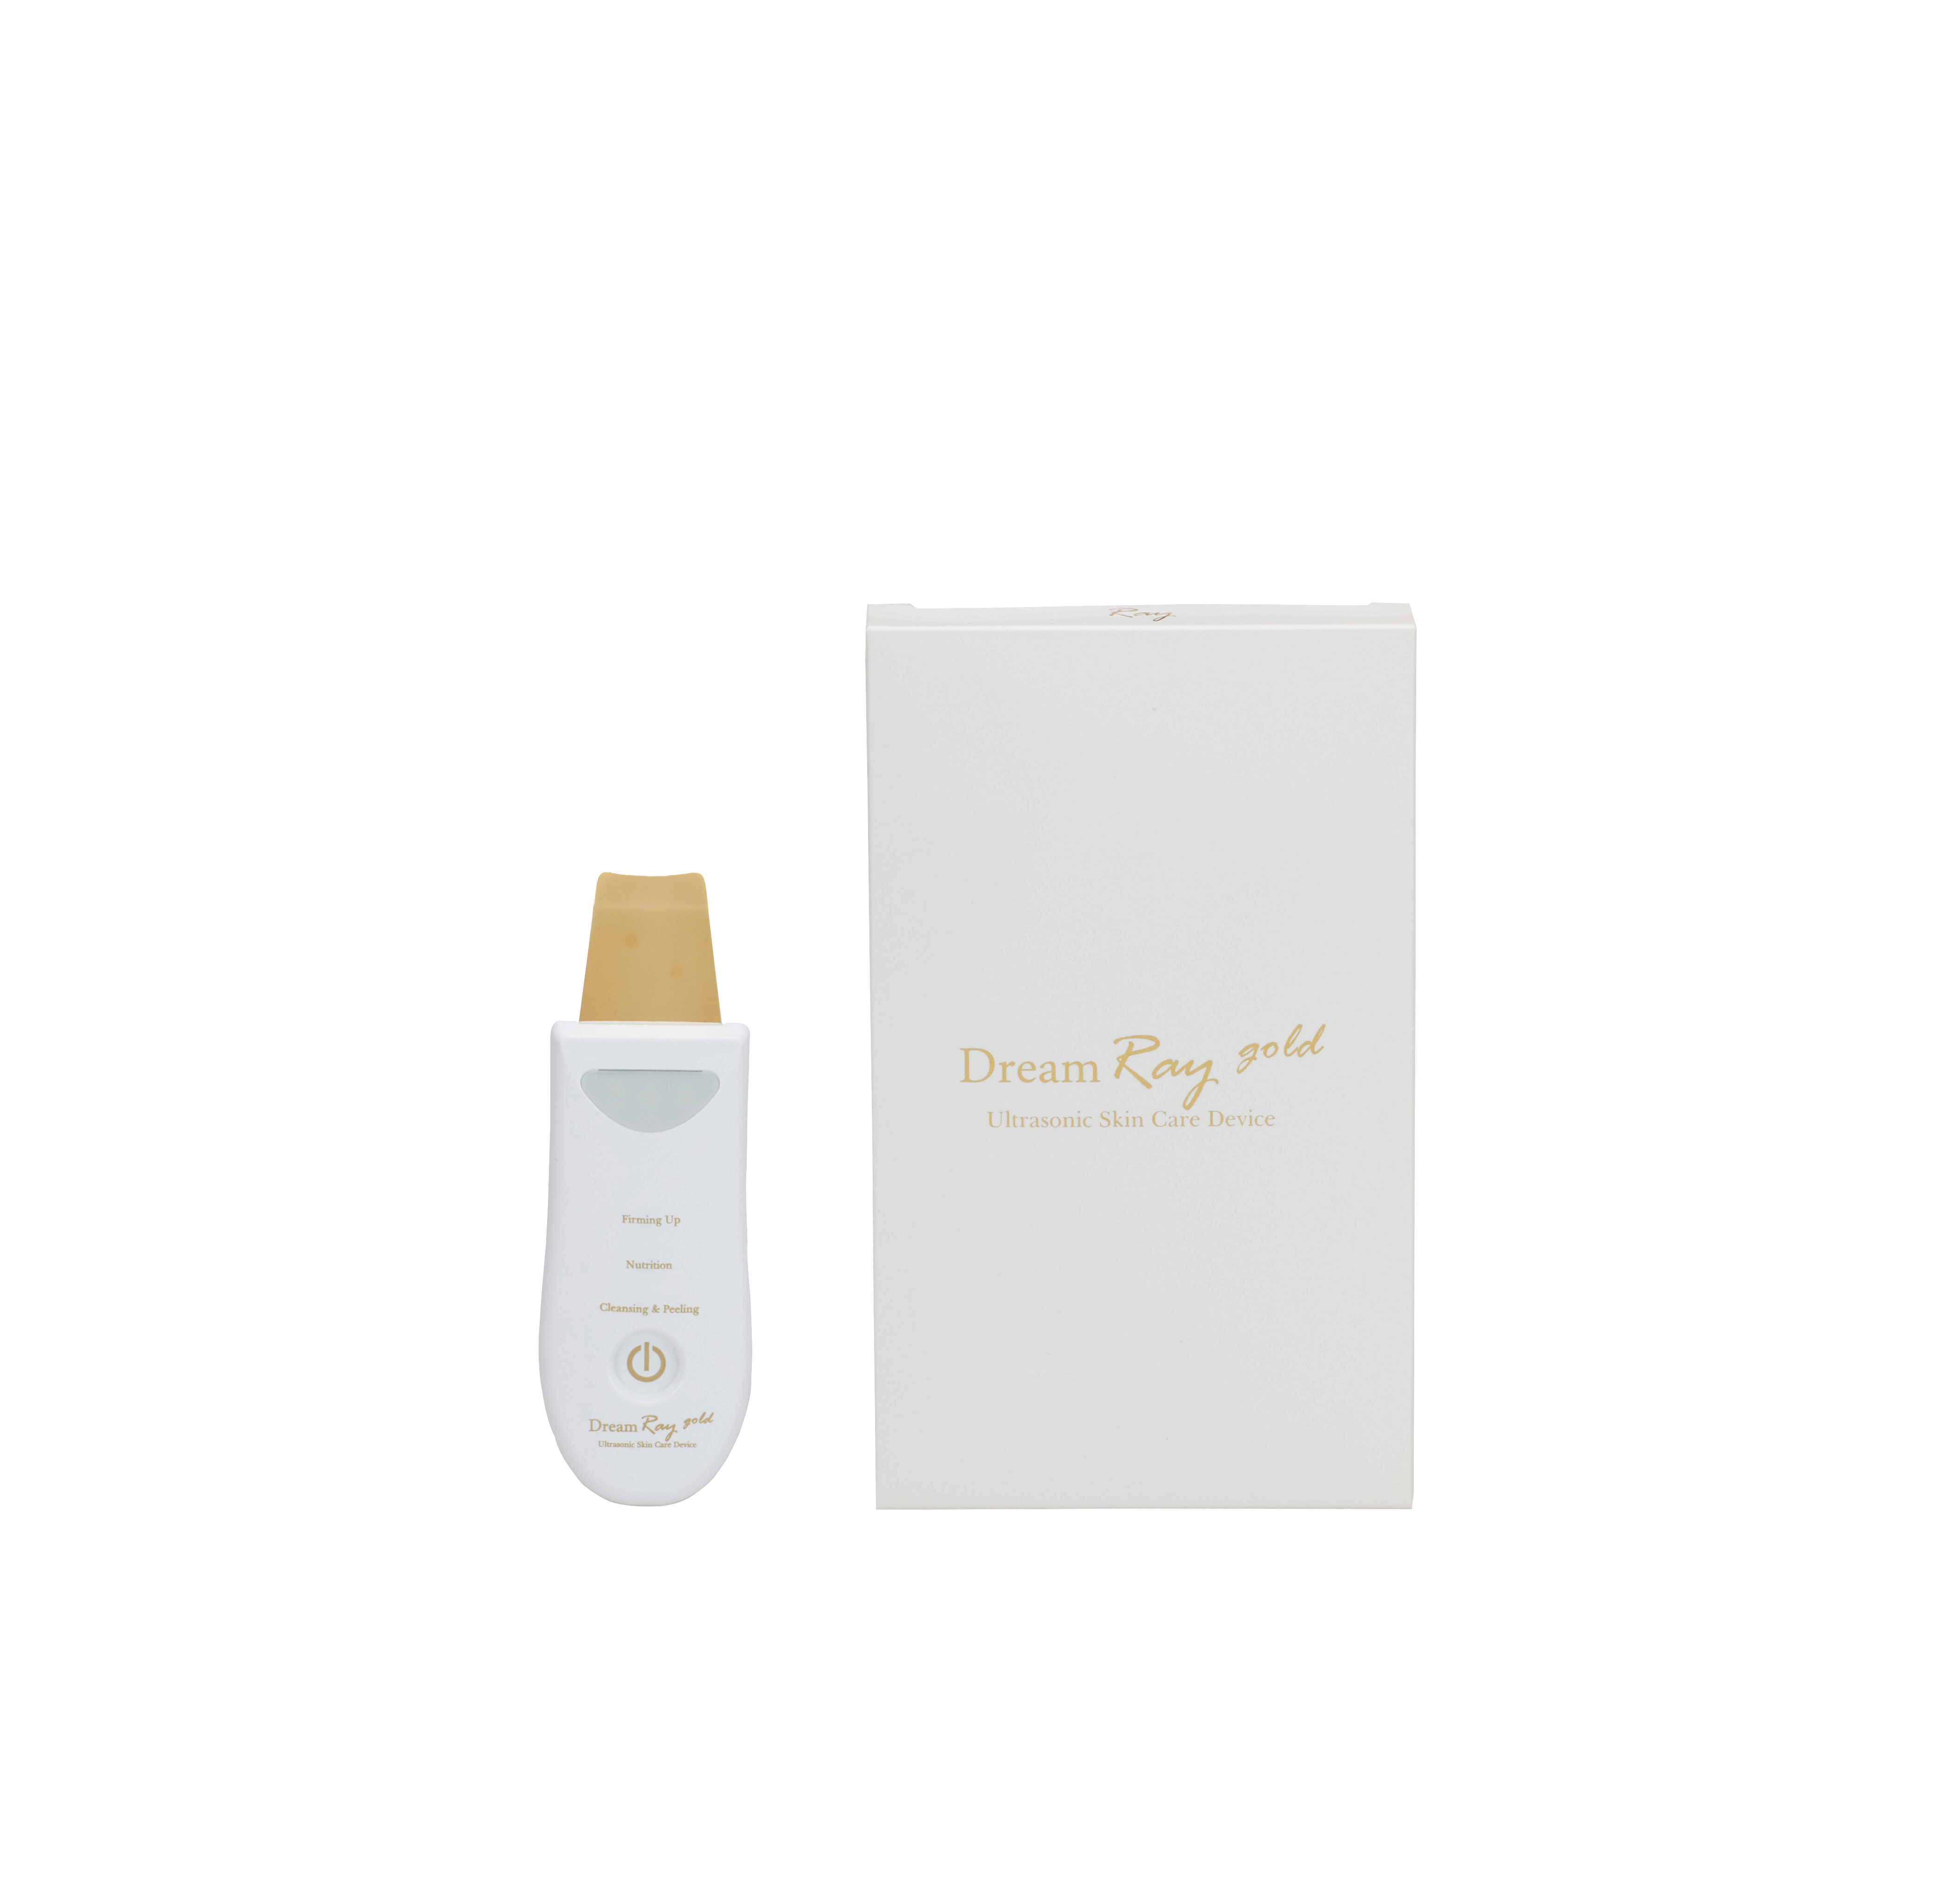 Dream Ray gold_ skin care_ facial care product_ nutrition